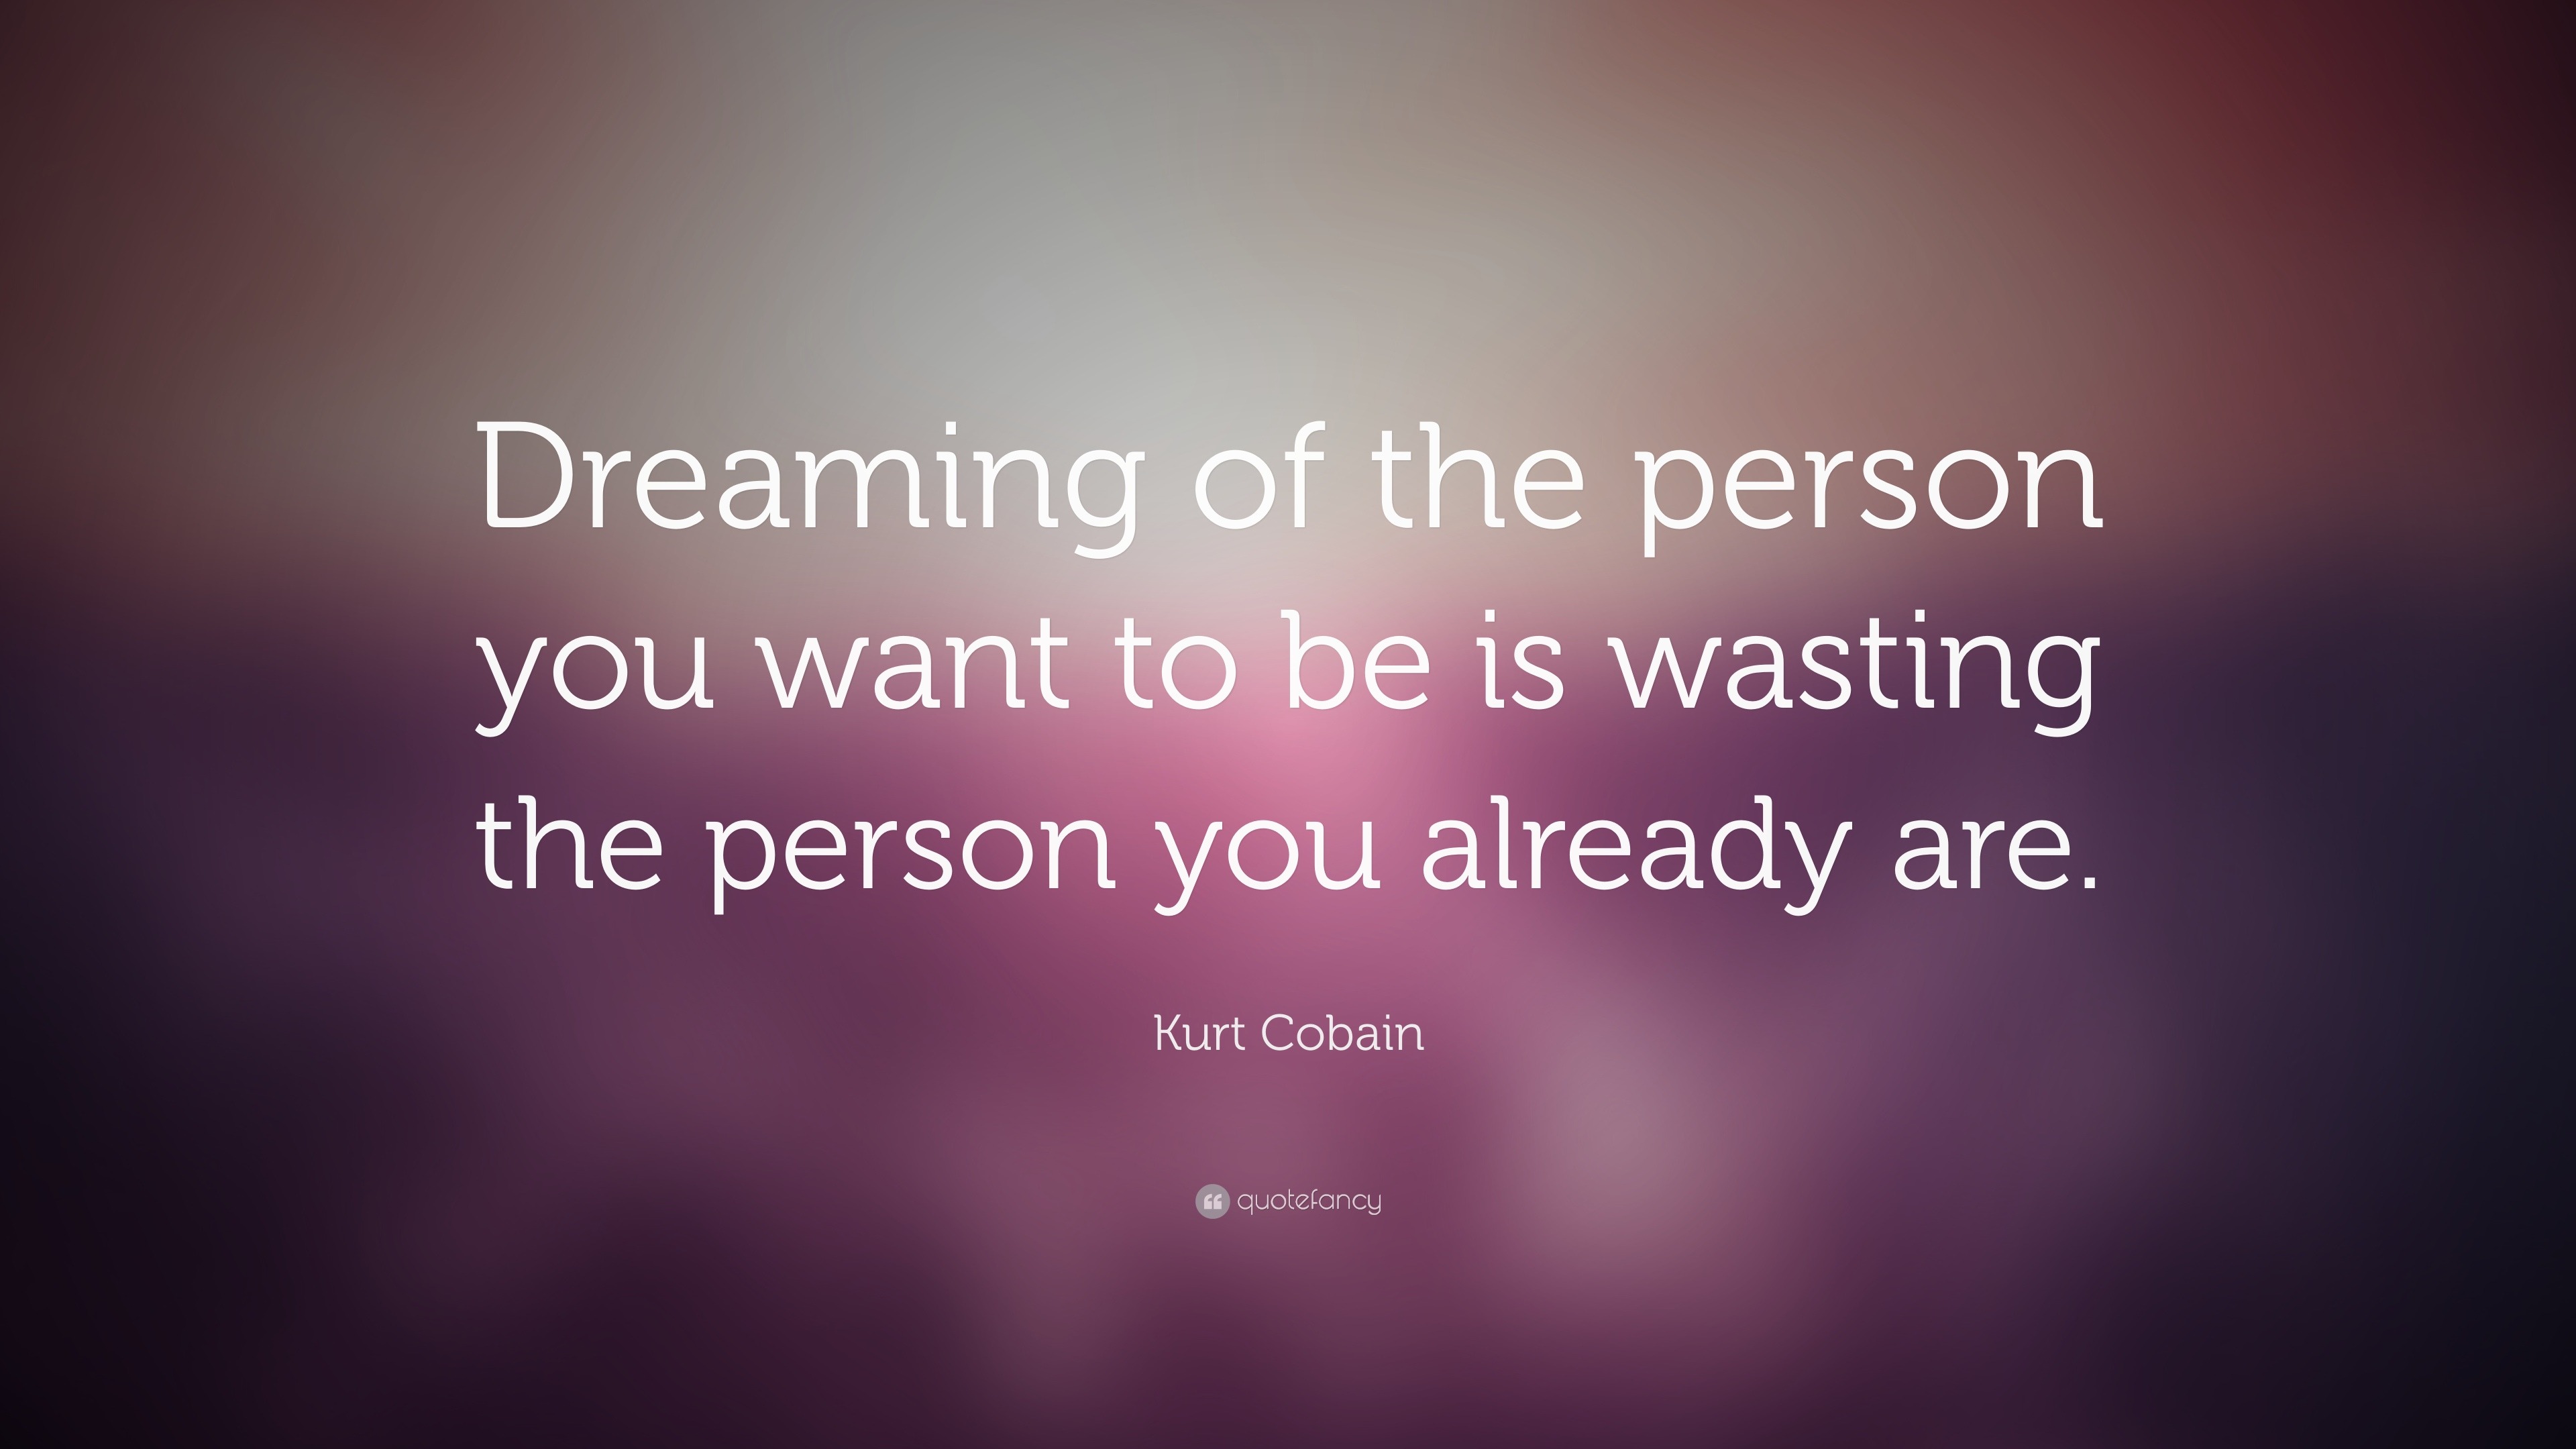 Kurt Cobain Quote “Dreaming of the person you want to be is wasting the